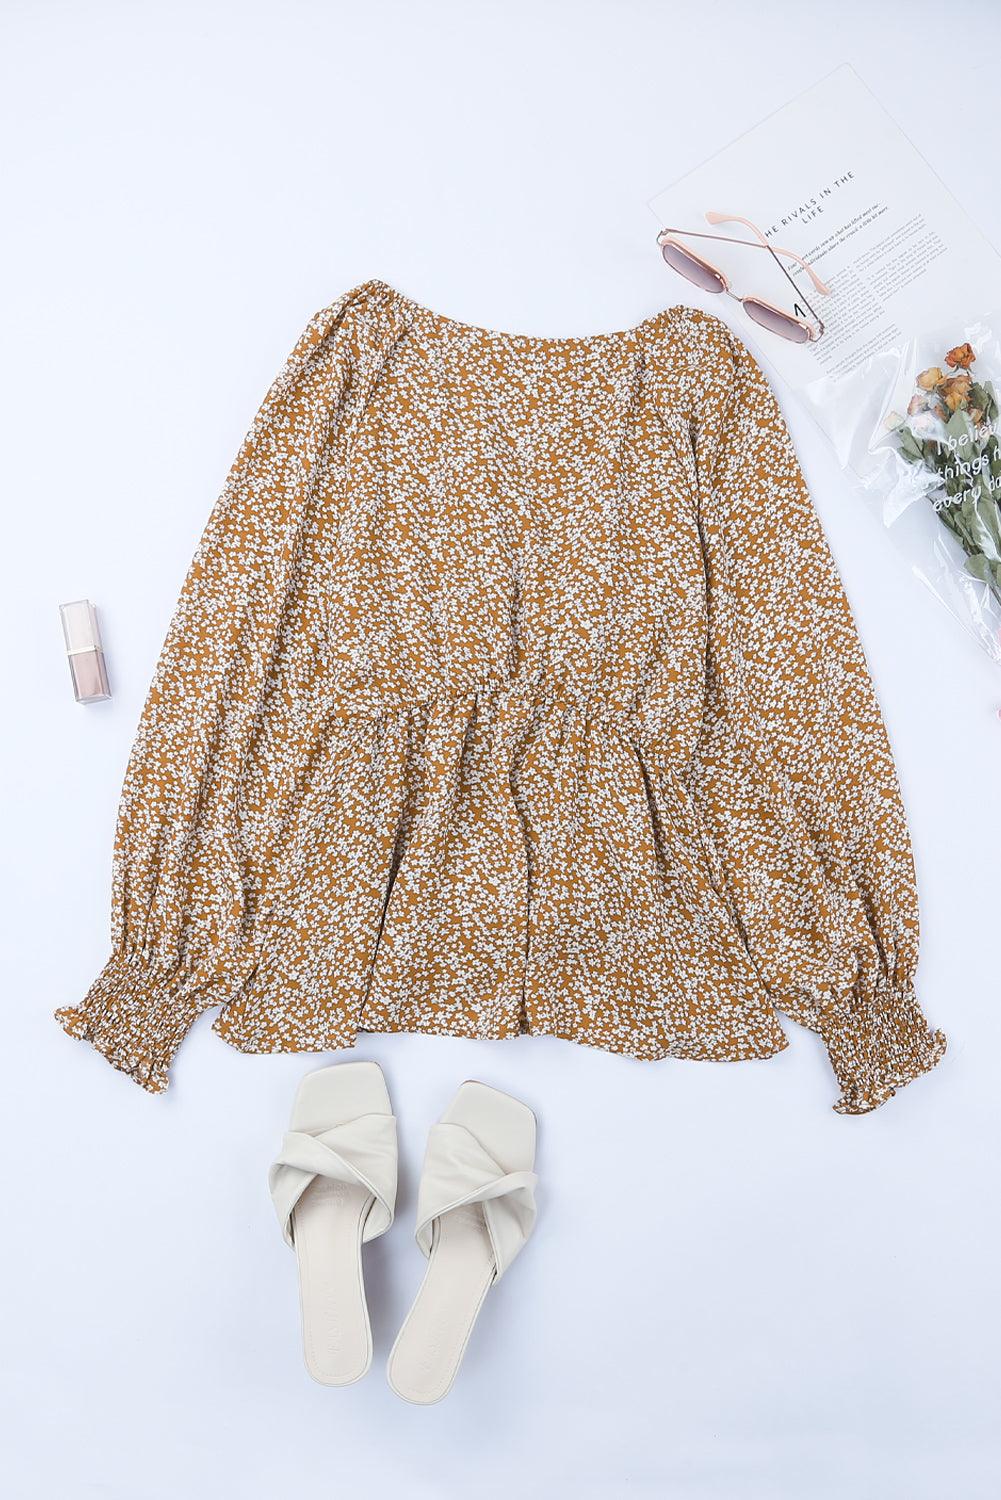 Floral Ruffled Long Sleeve Blouse with Front Tie for Women